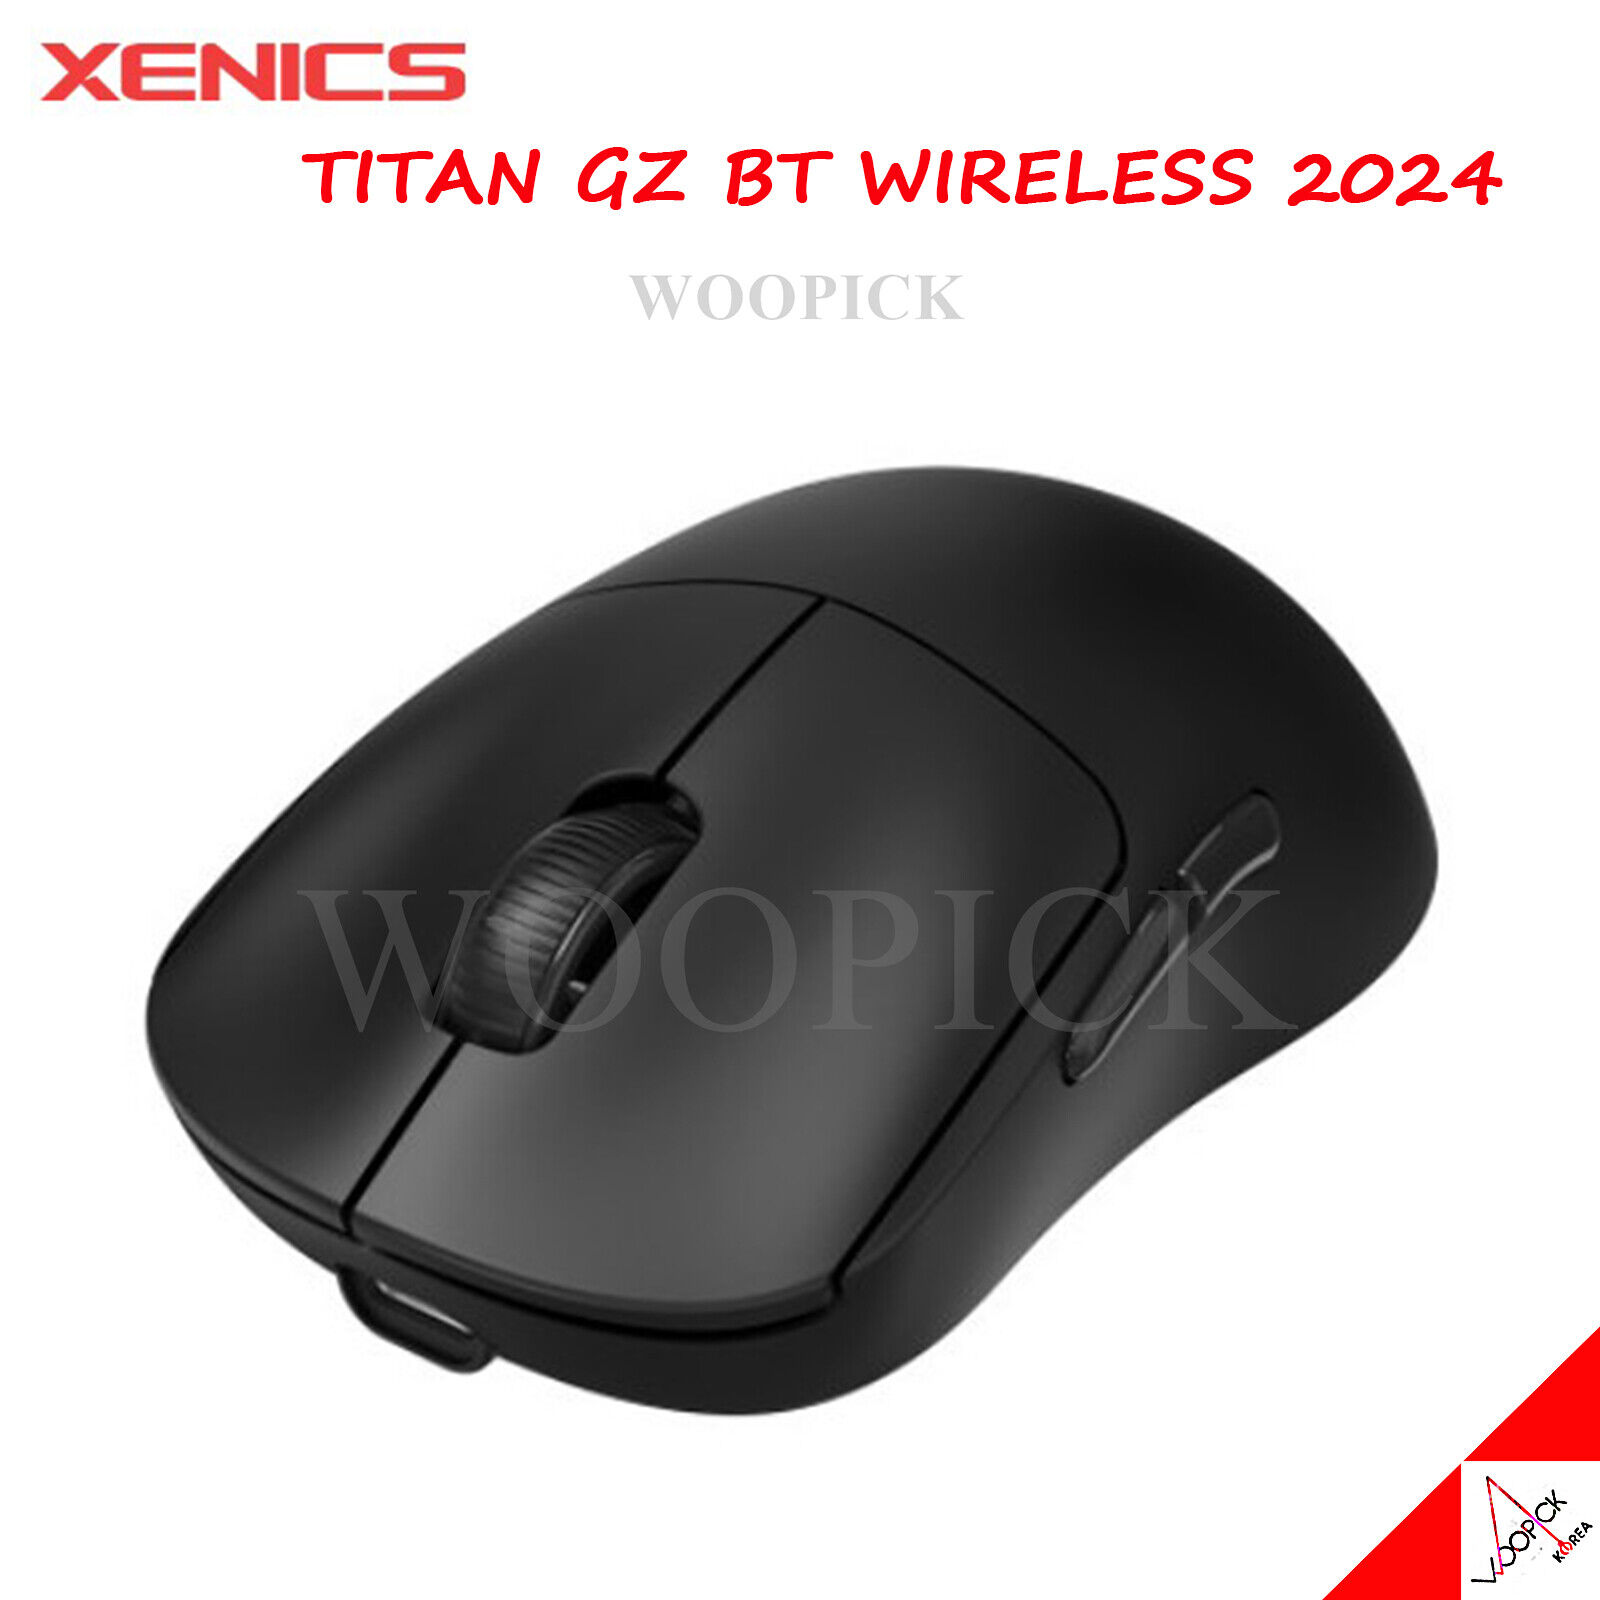 Xenics Titan GZ BT AIR Wireless Professional Gaming Mouse 26000DPI PAW3395 2024